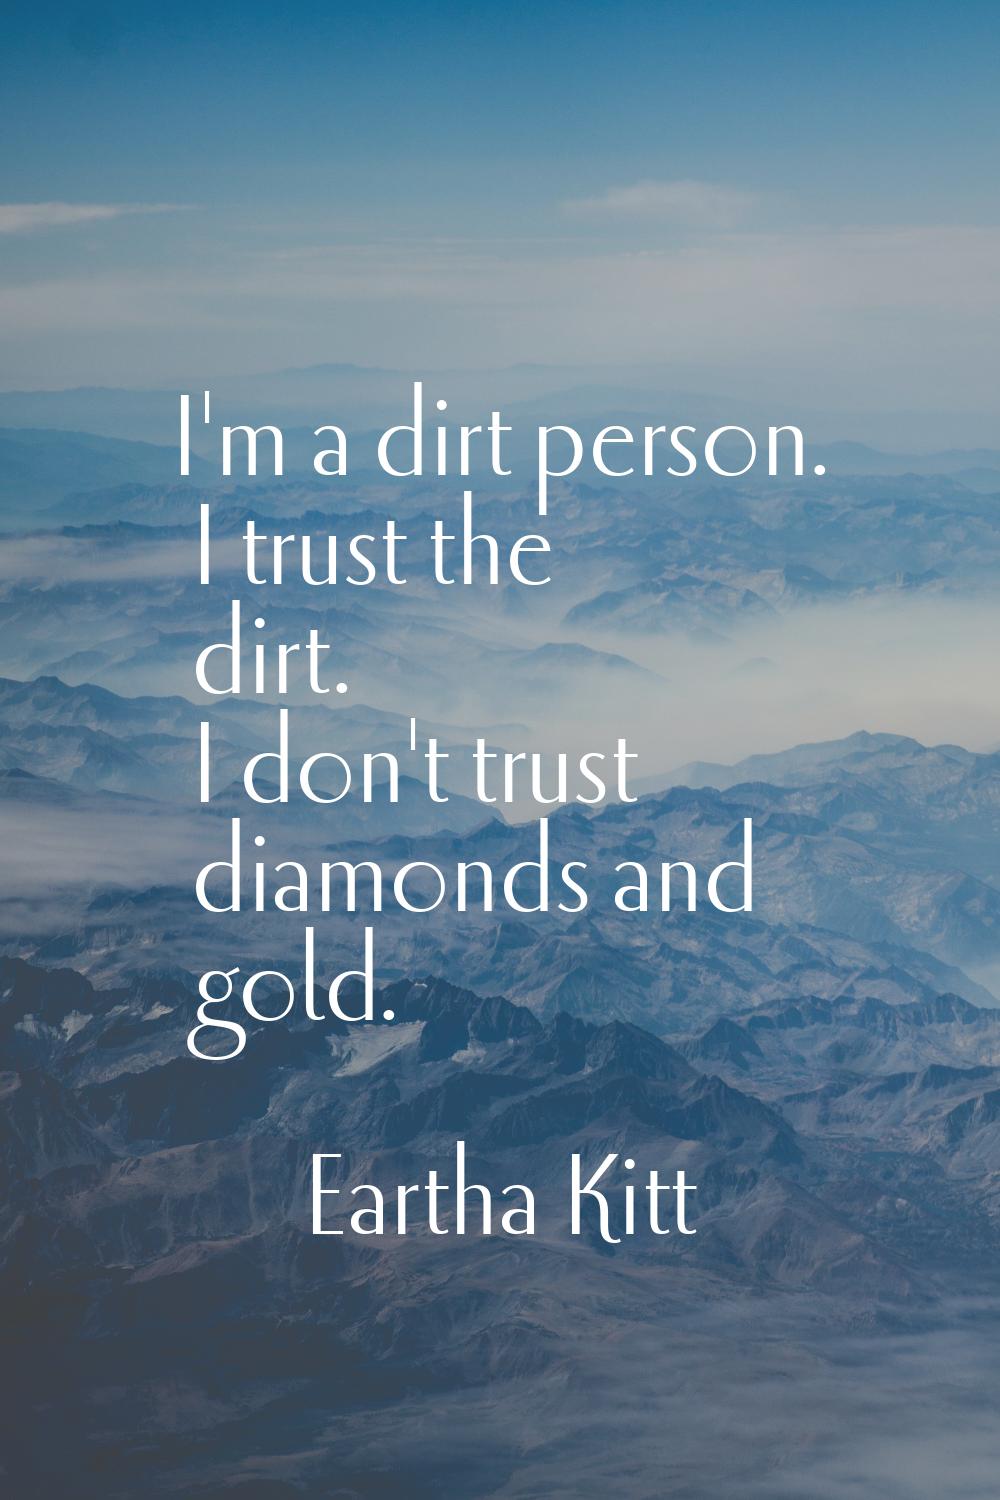 I'm a dirt person. I trust the dirt. I don't trust diamonds and gold.